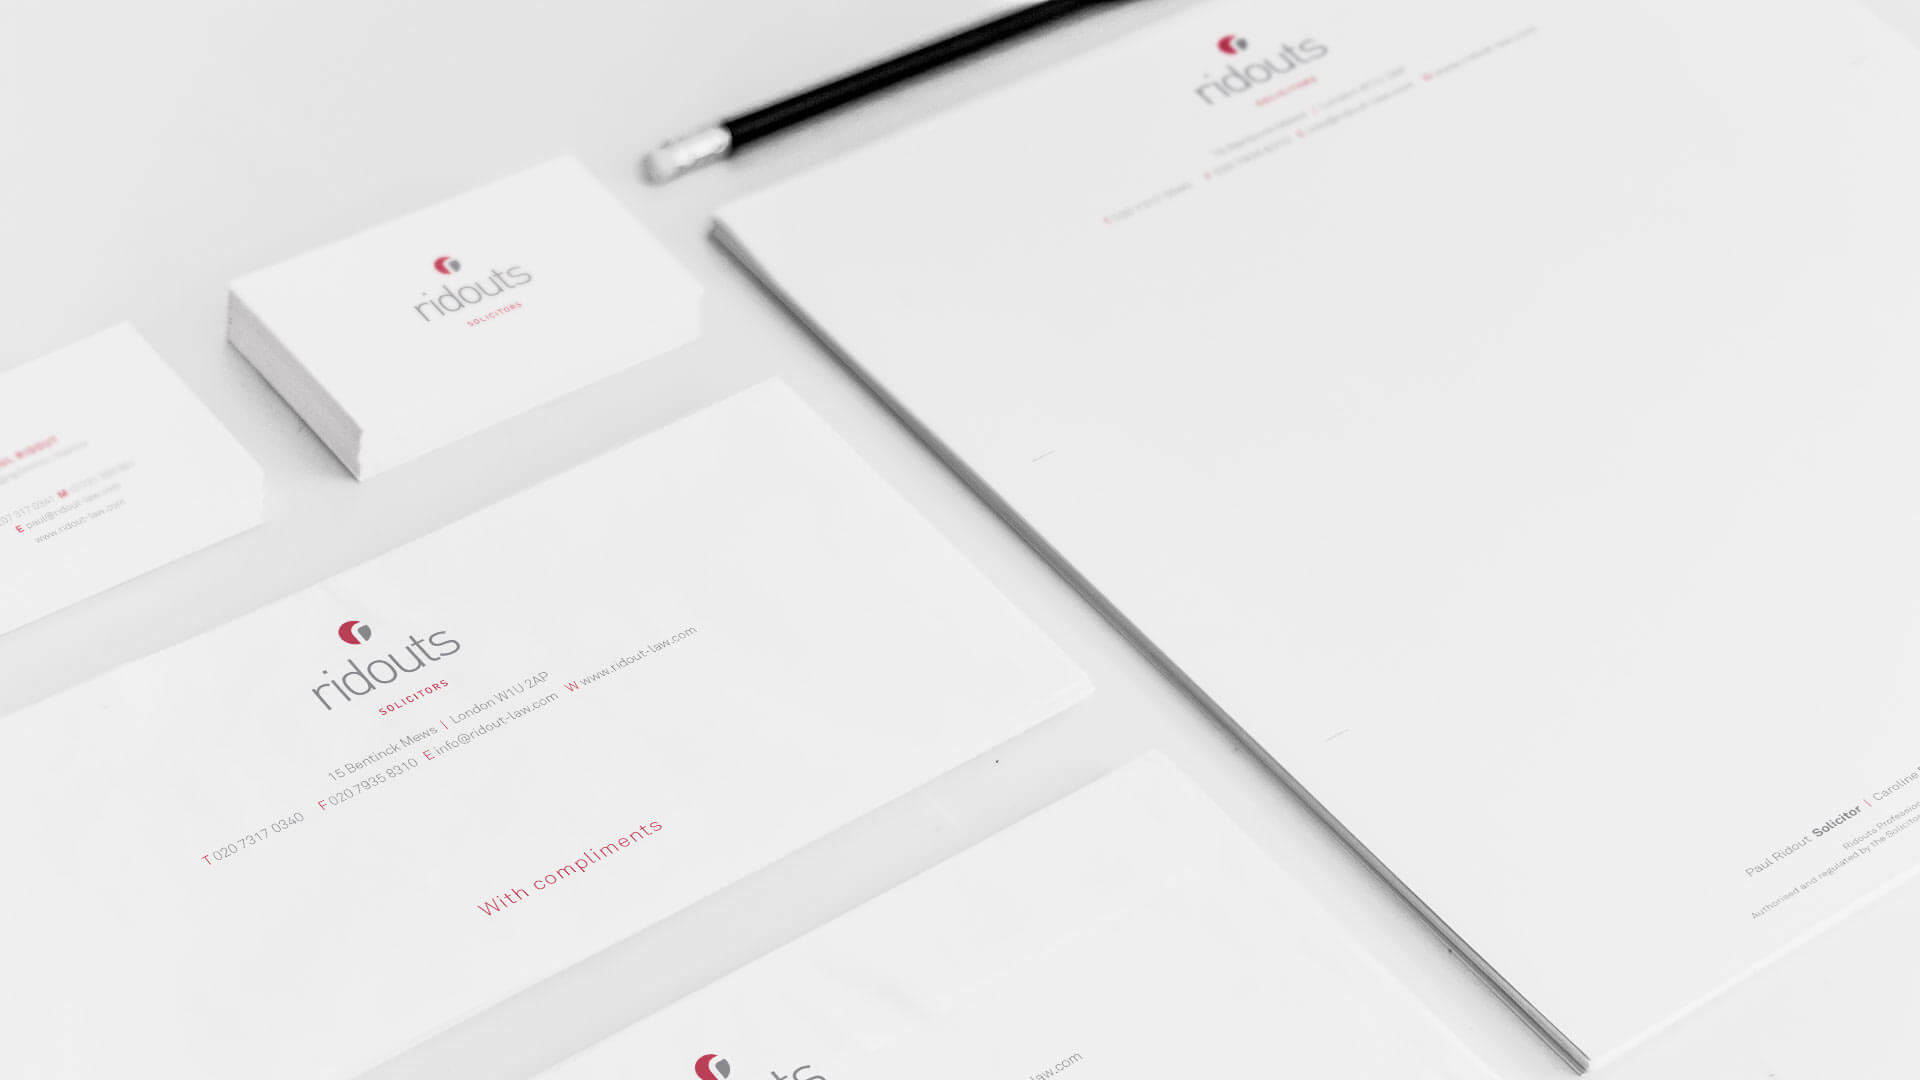 Ridouts Solicitors stationery